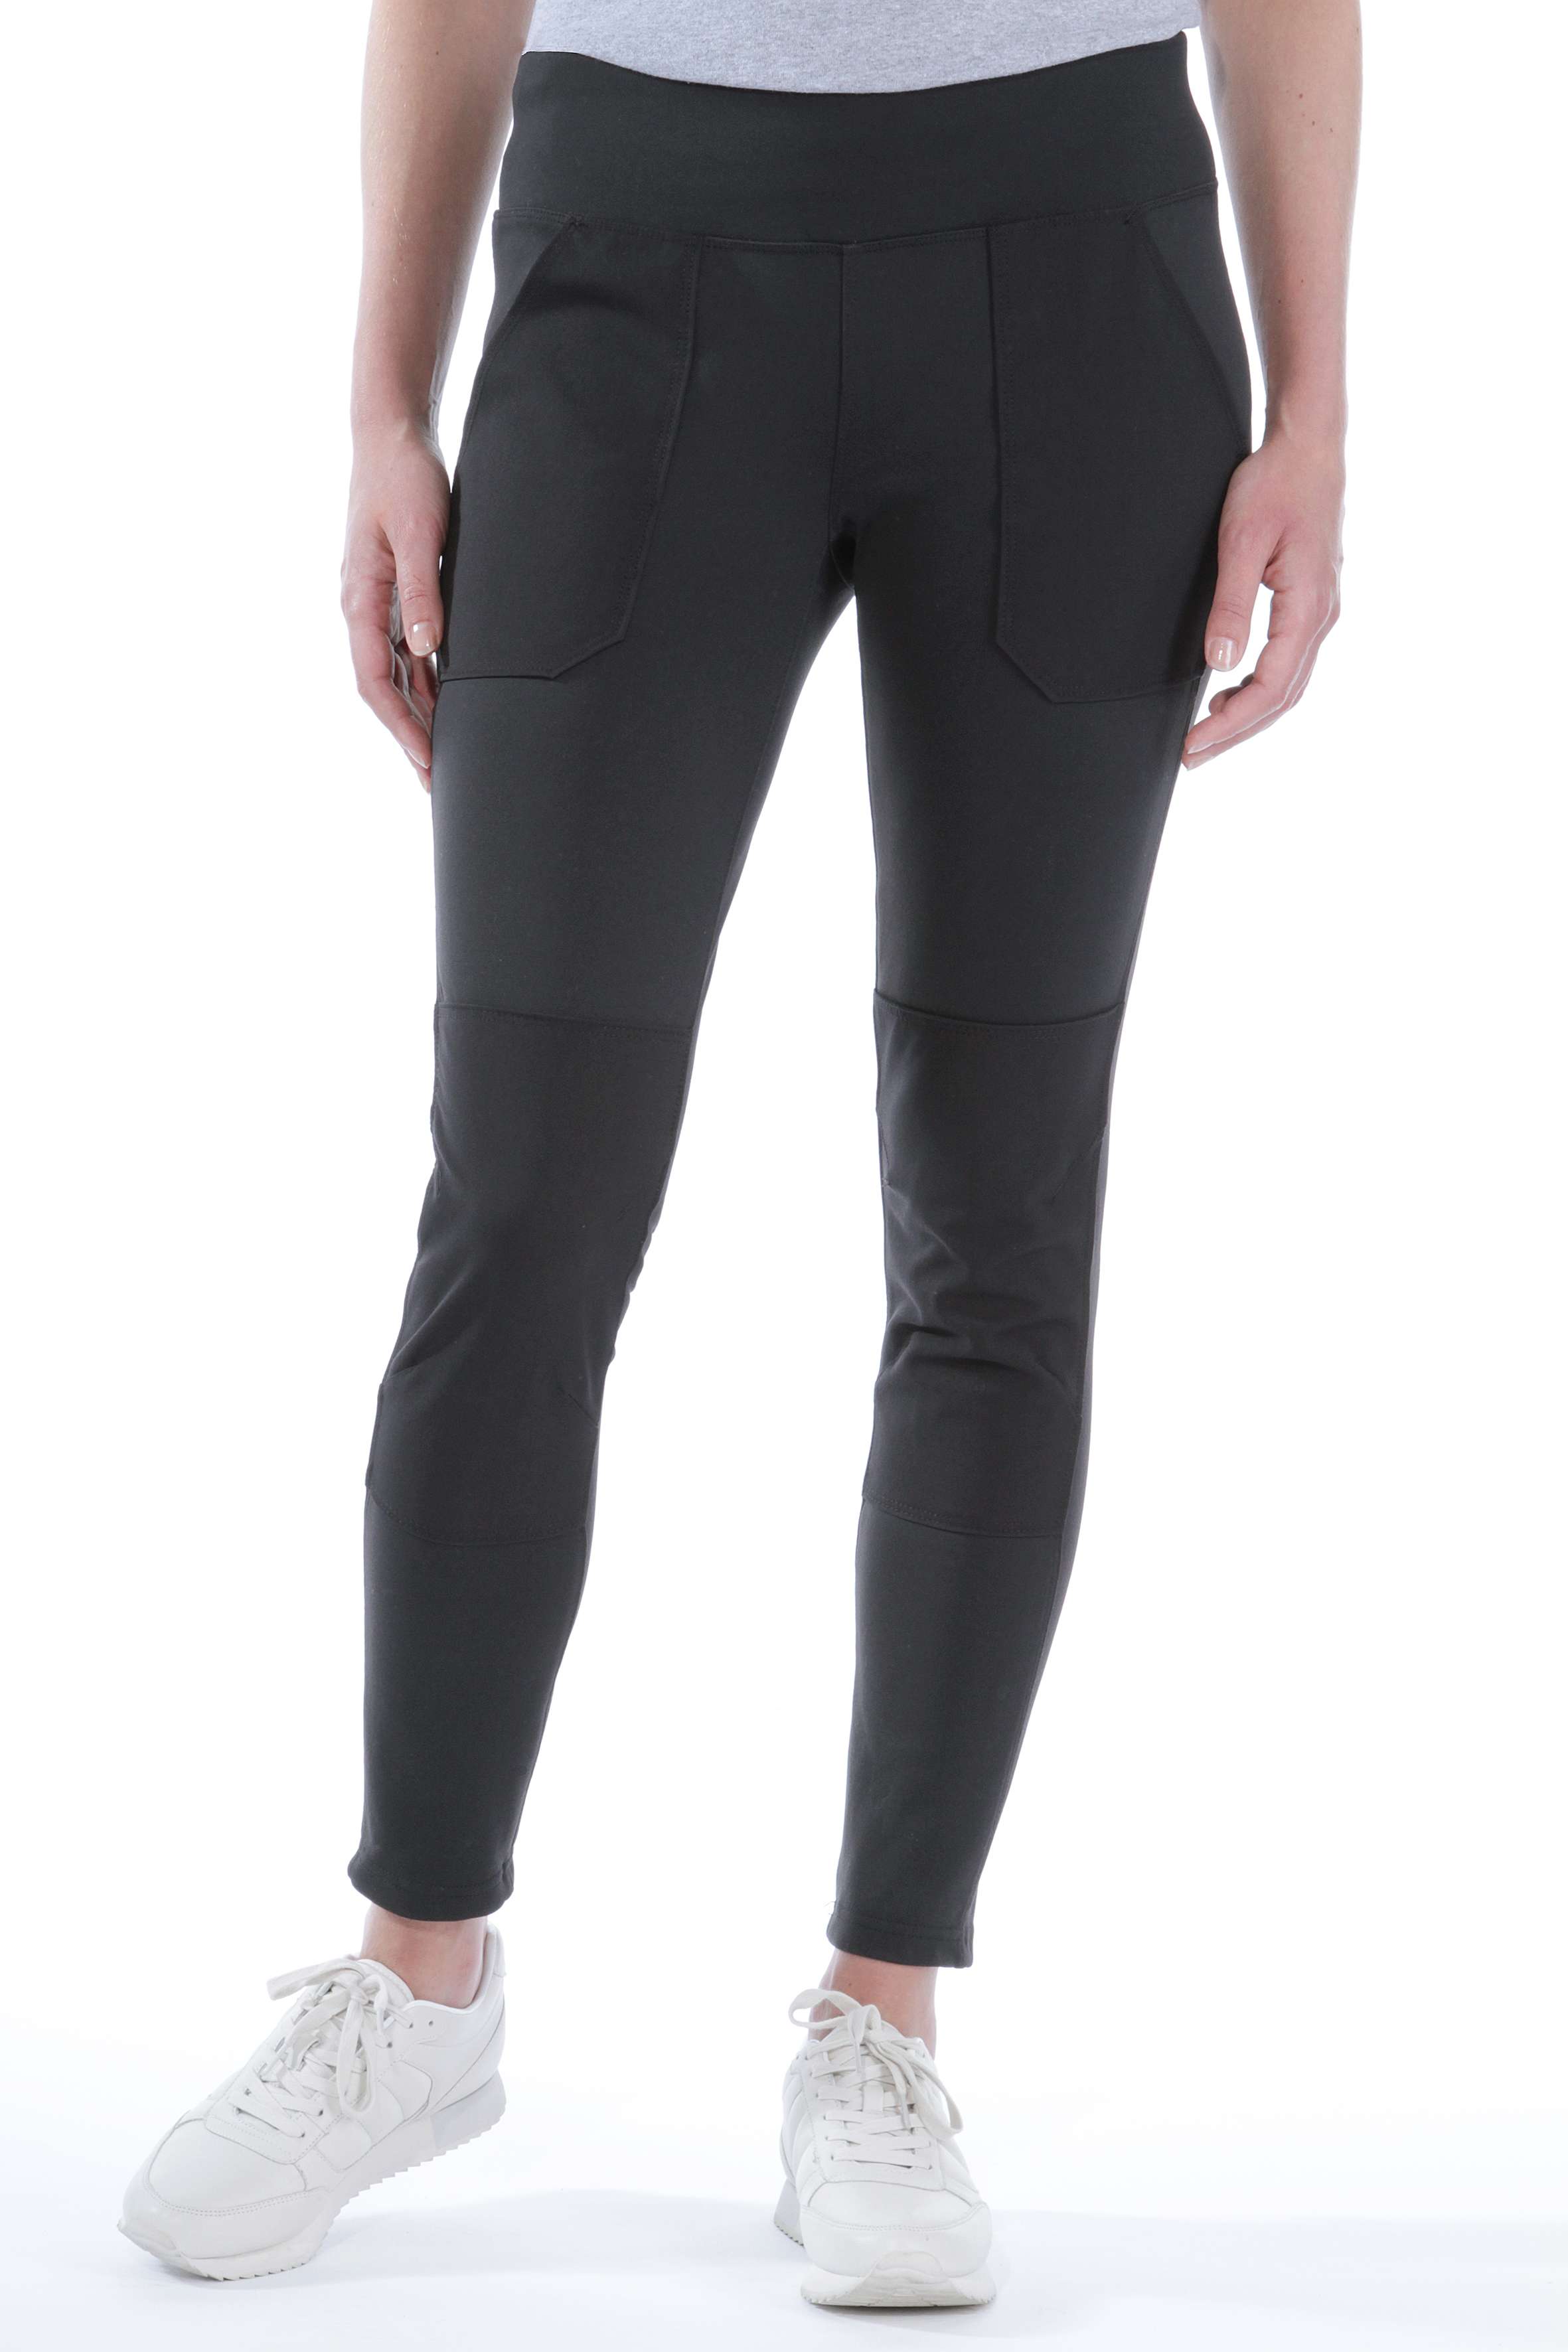 CARHARTT FORCE™ FITTED HEAVYWEIGHT LINED LEGGING